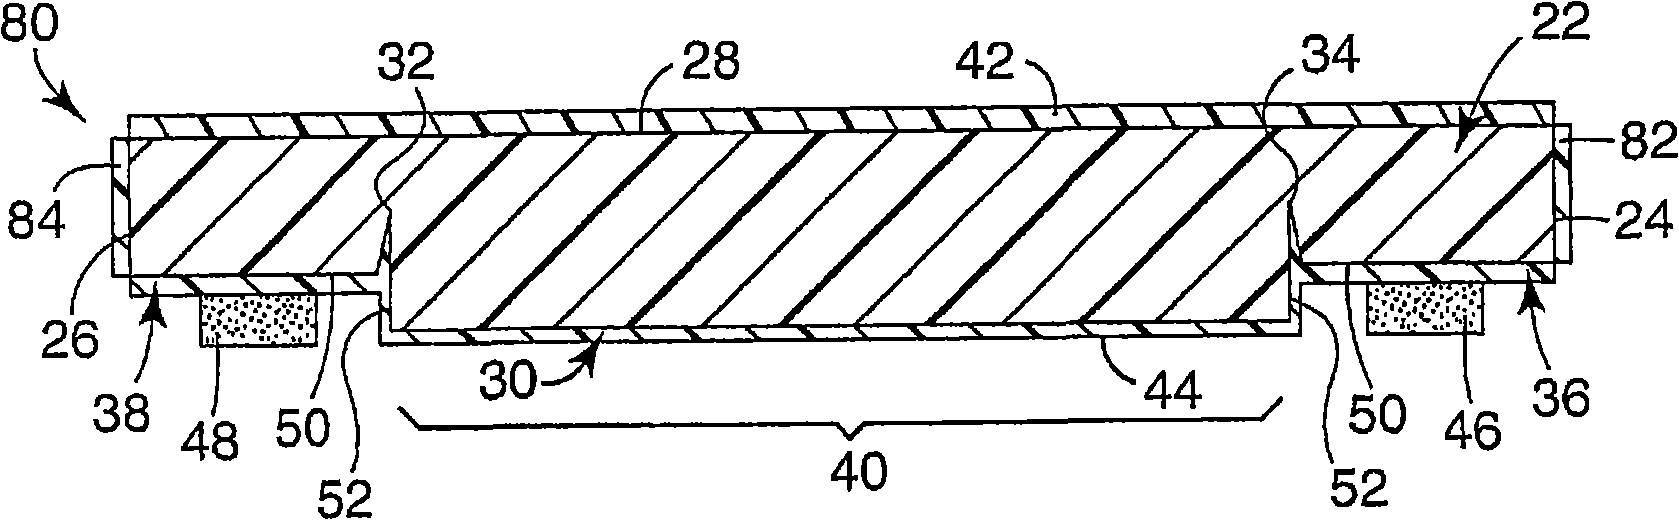 Apparatus for manufacture of cover tape